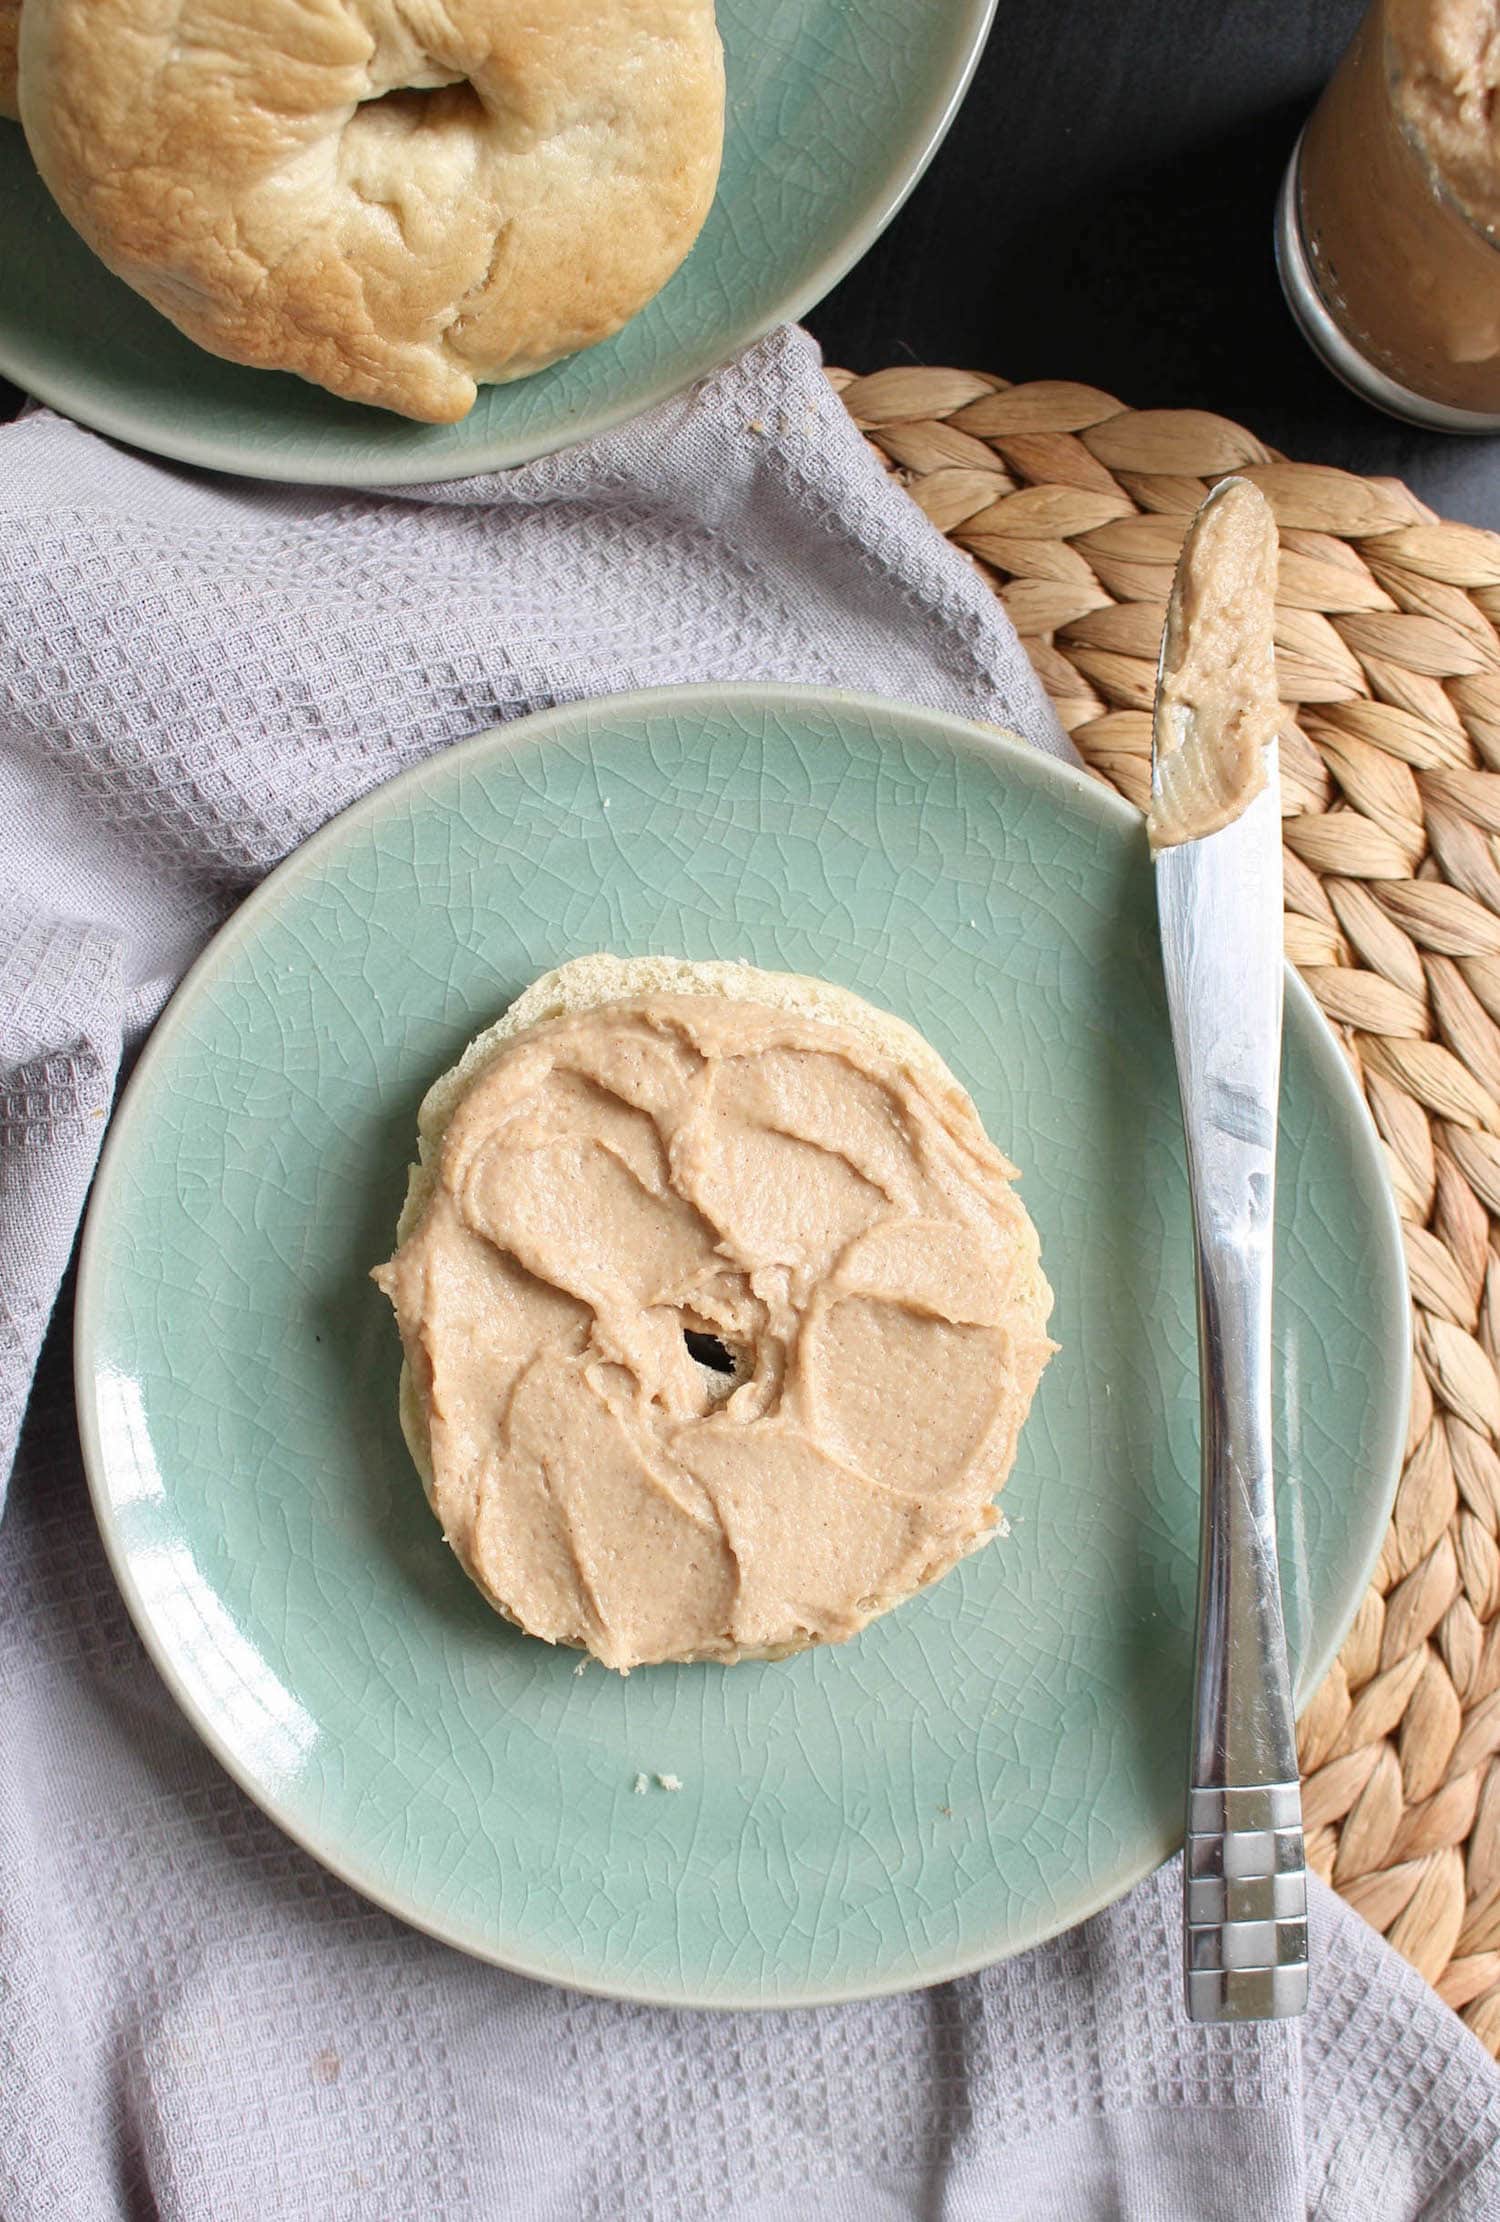 Dairy-Free Cinnamon Maple Cream Cheese smeared on a bagel